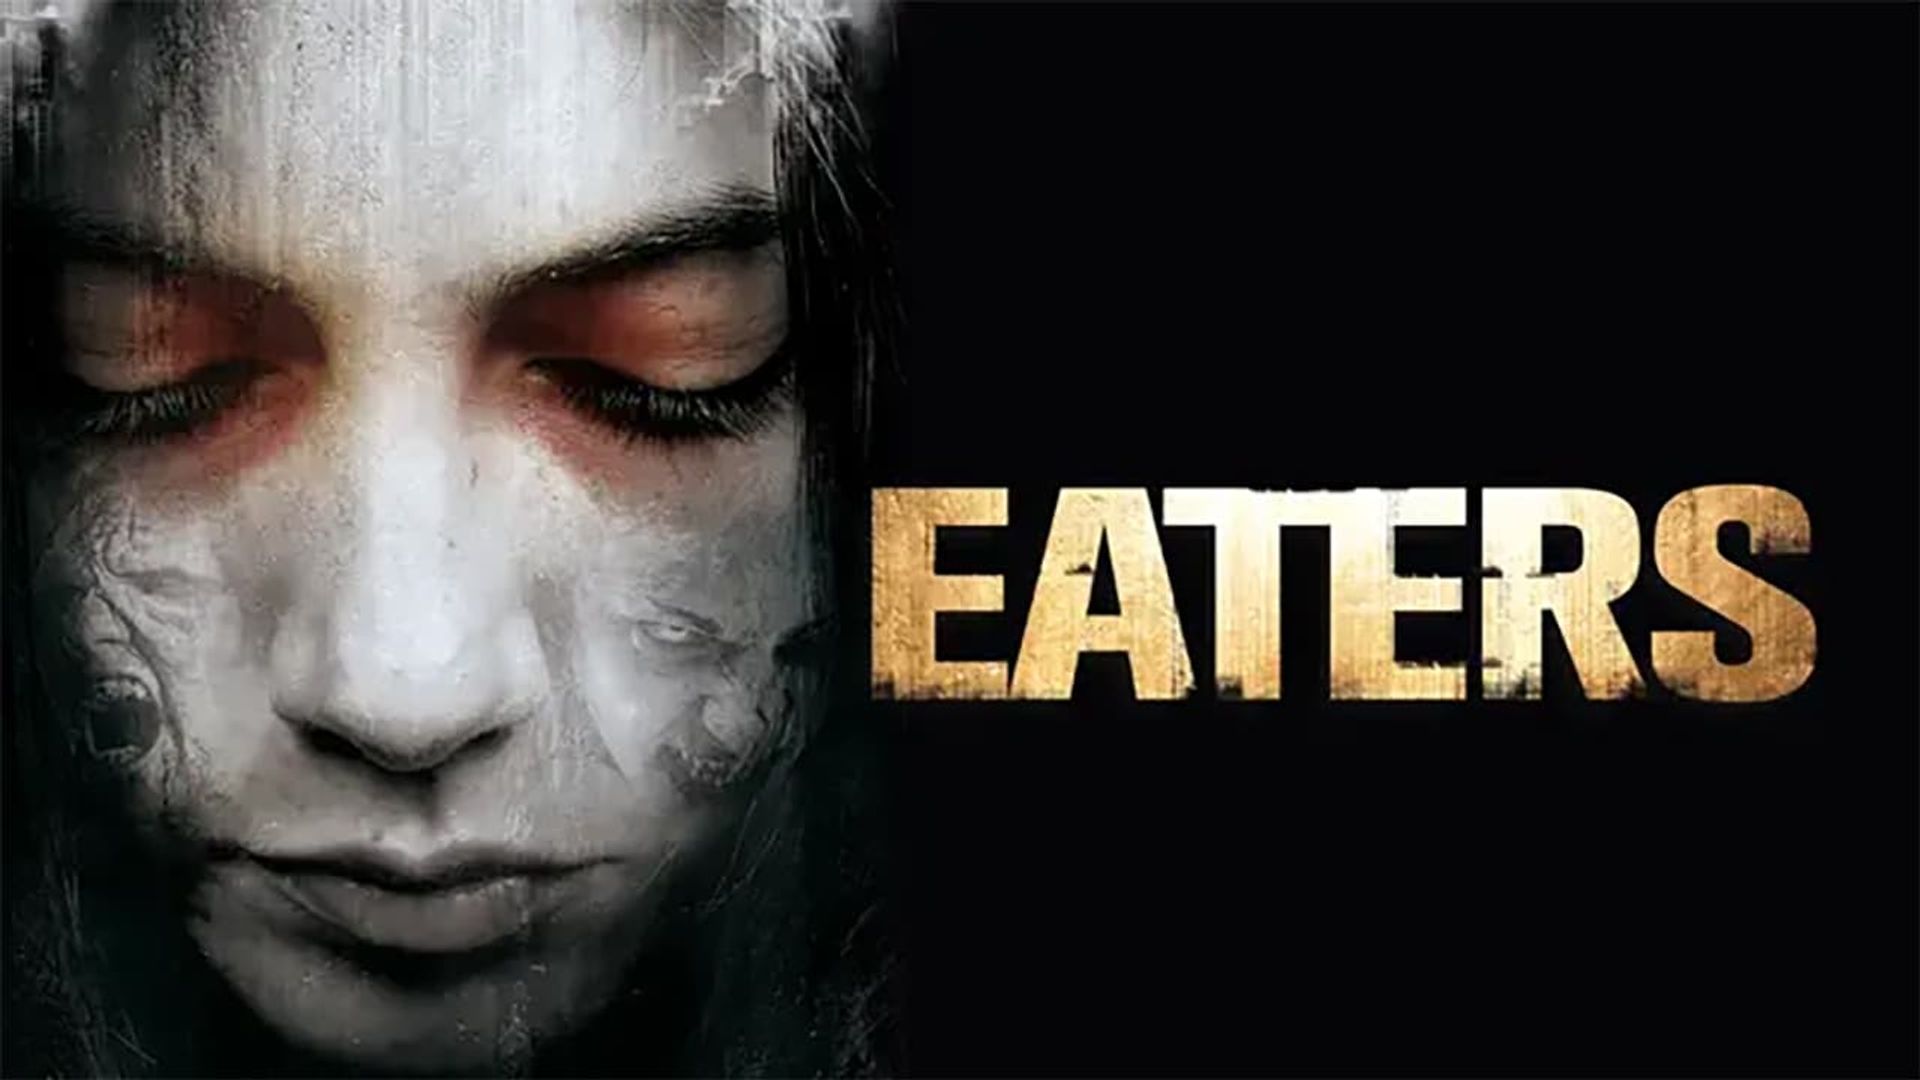 Eaters background